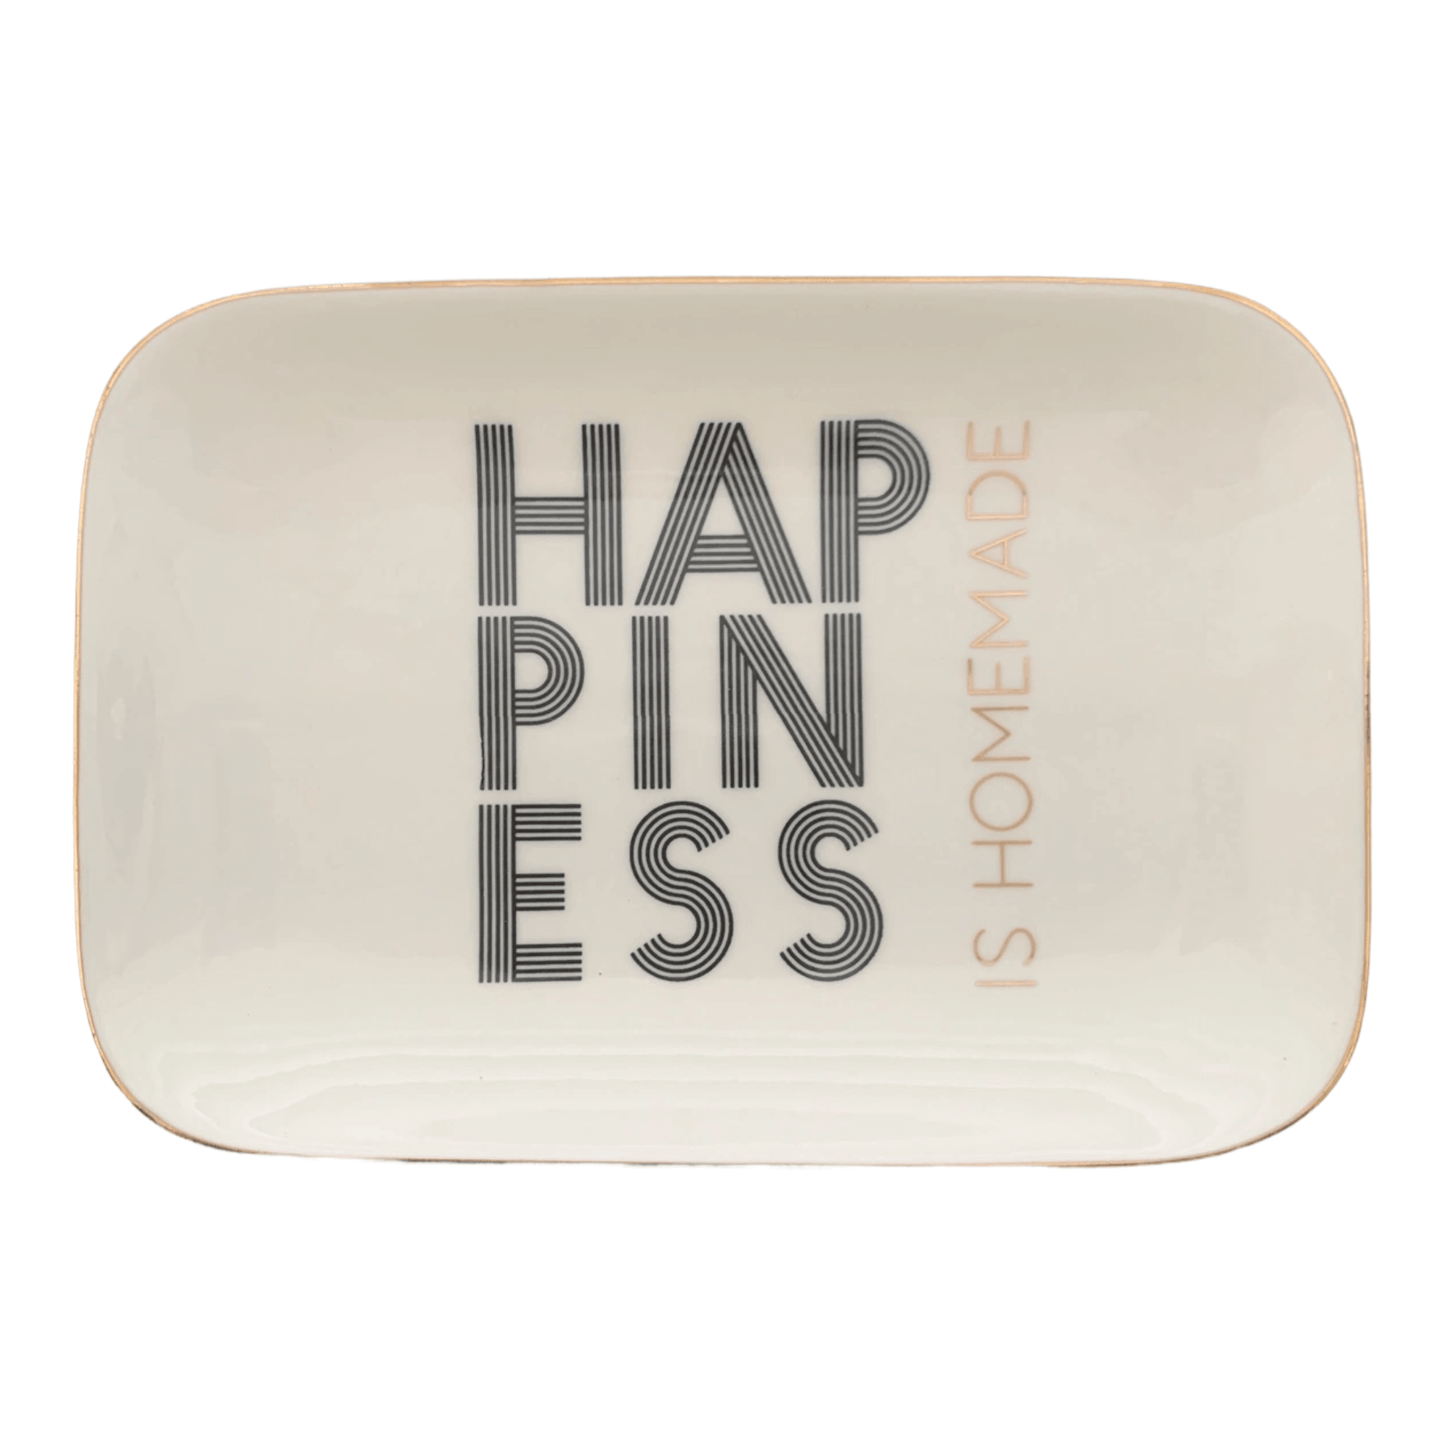 Love plate "Happiness is homemade"